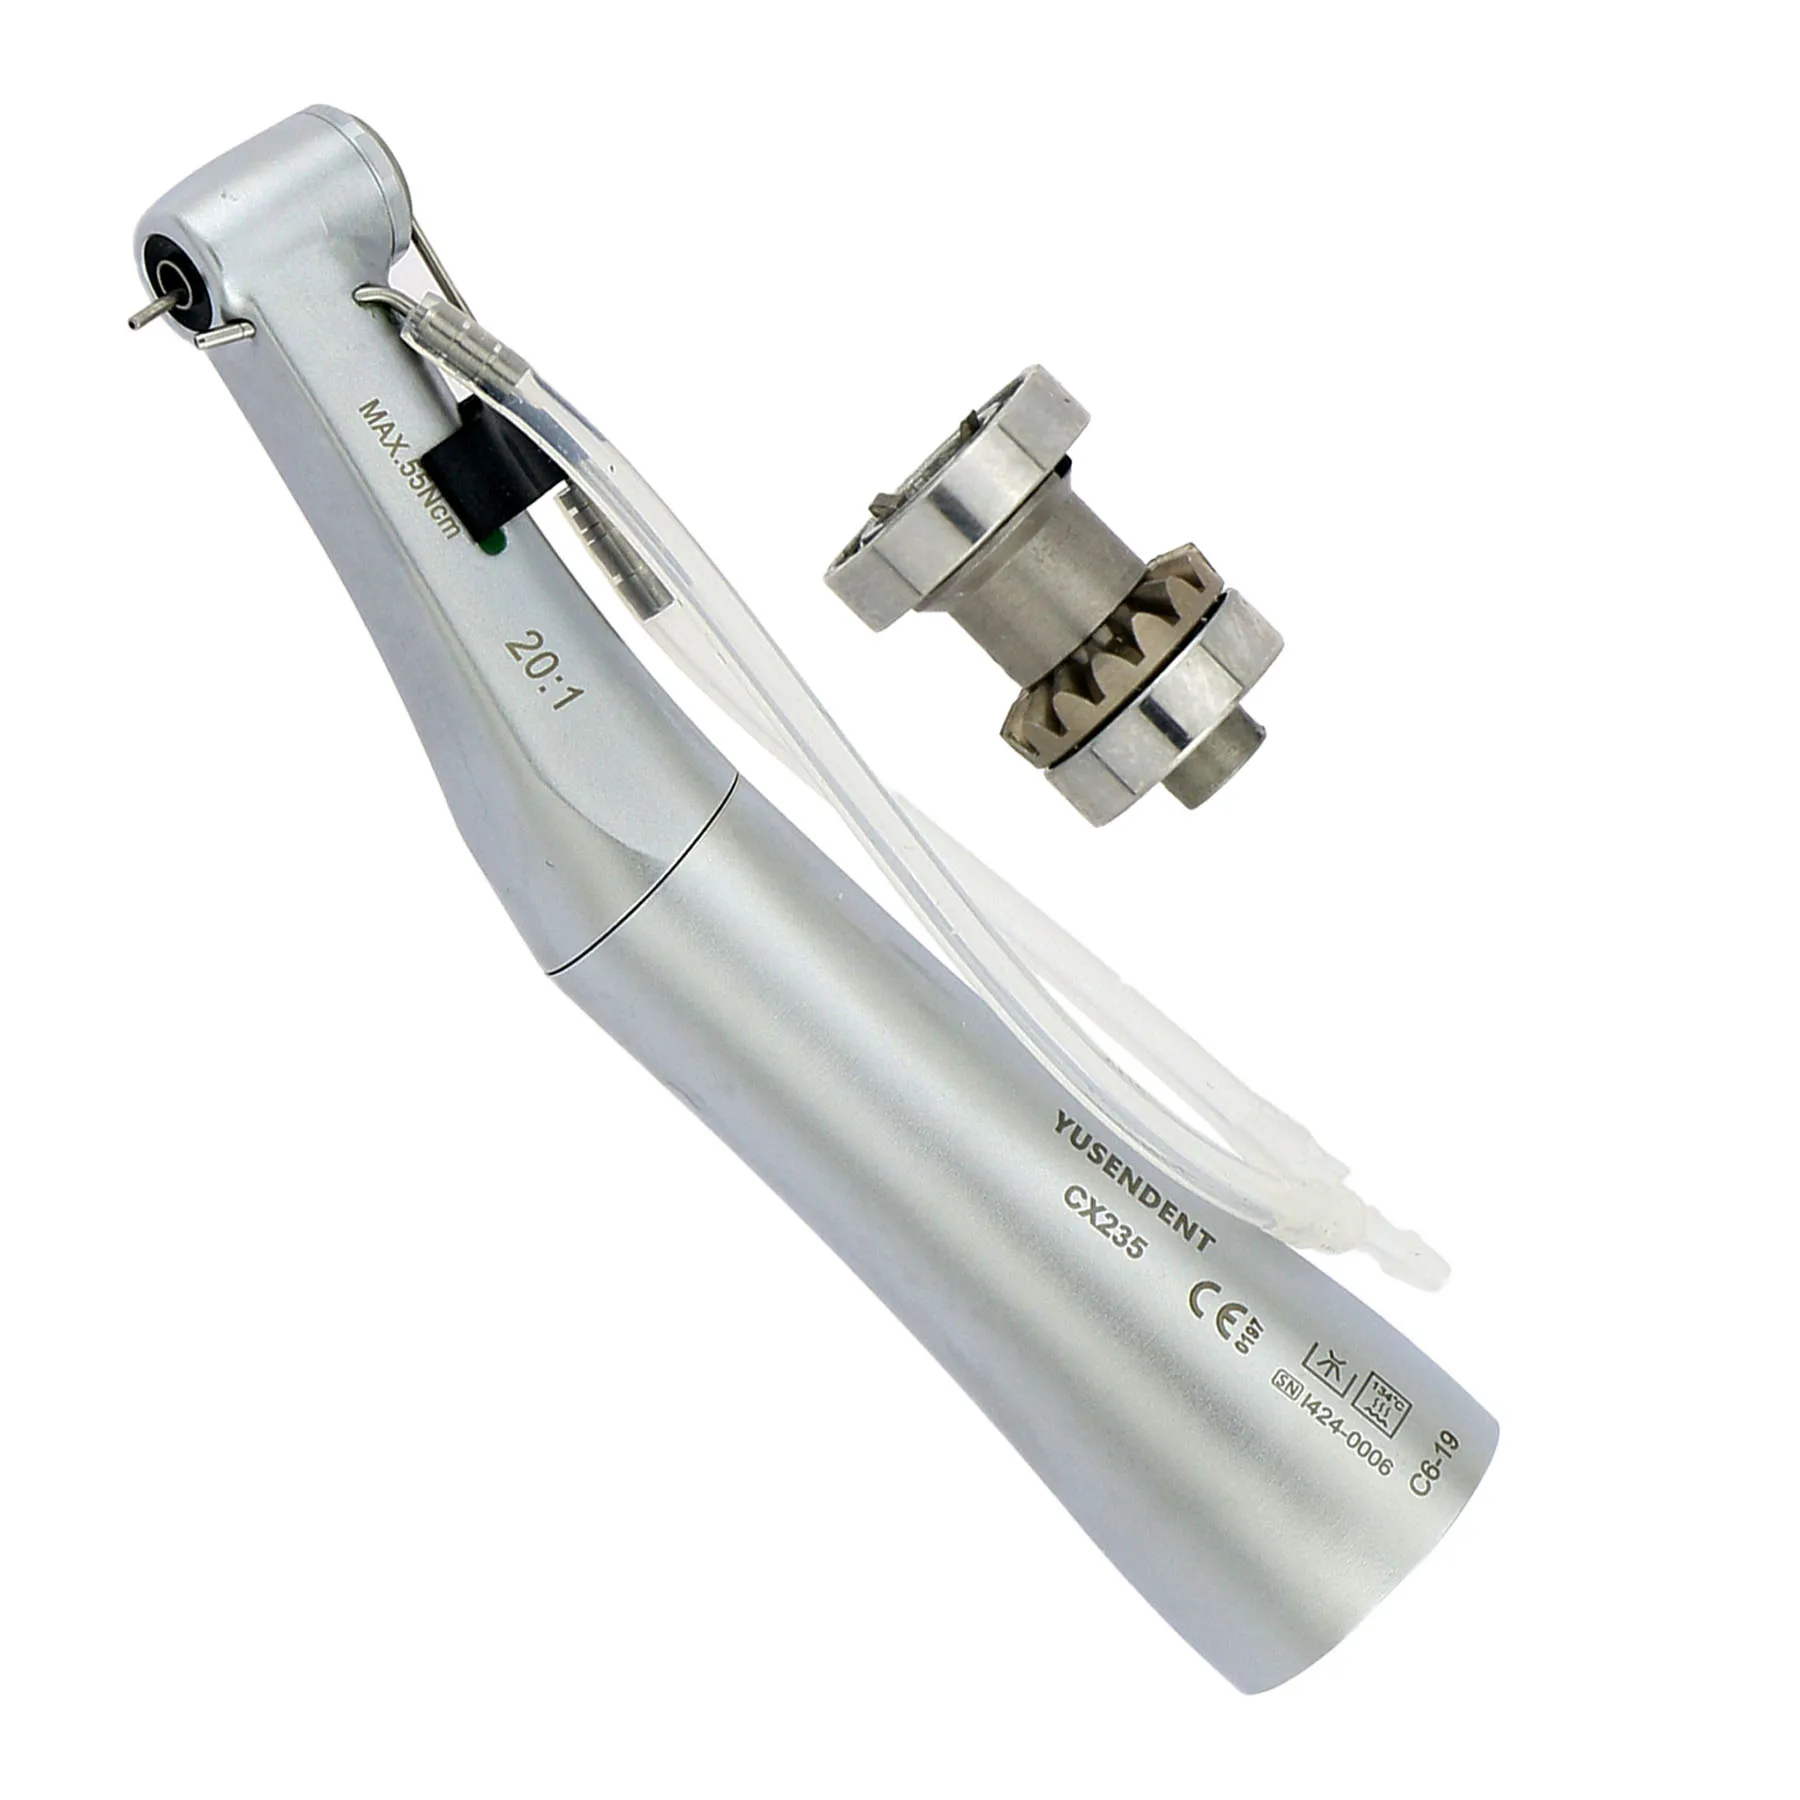 COXO YUSENDENT Dental 20:1 Implant Surgery Contra Angle Rotor Shaft Handpiece Super Strong Torsion CX235 C6-19